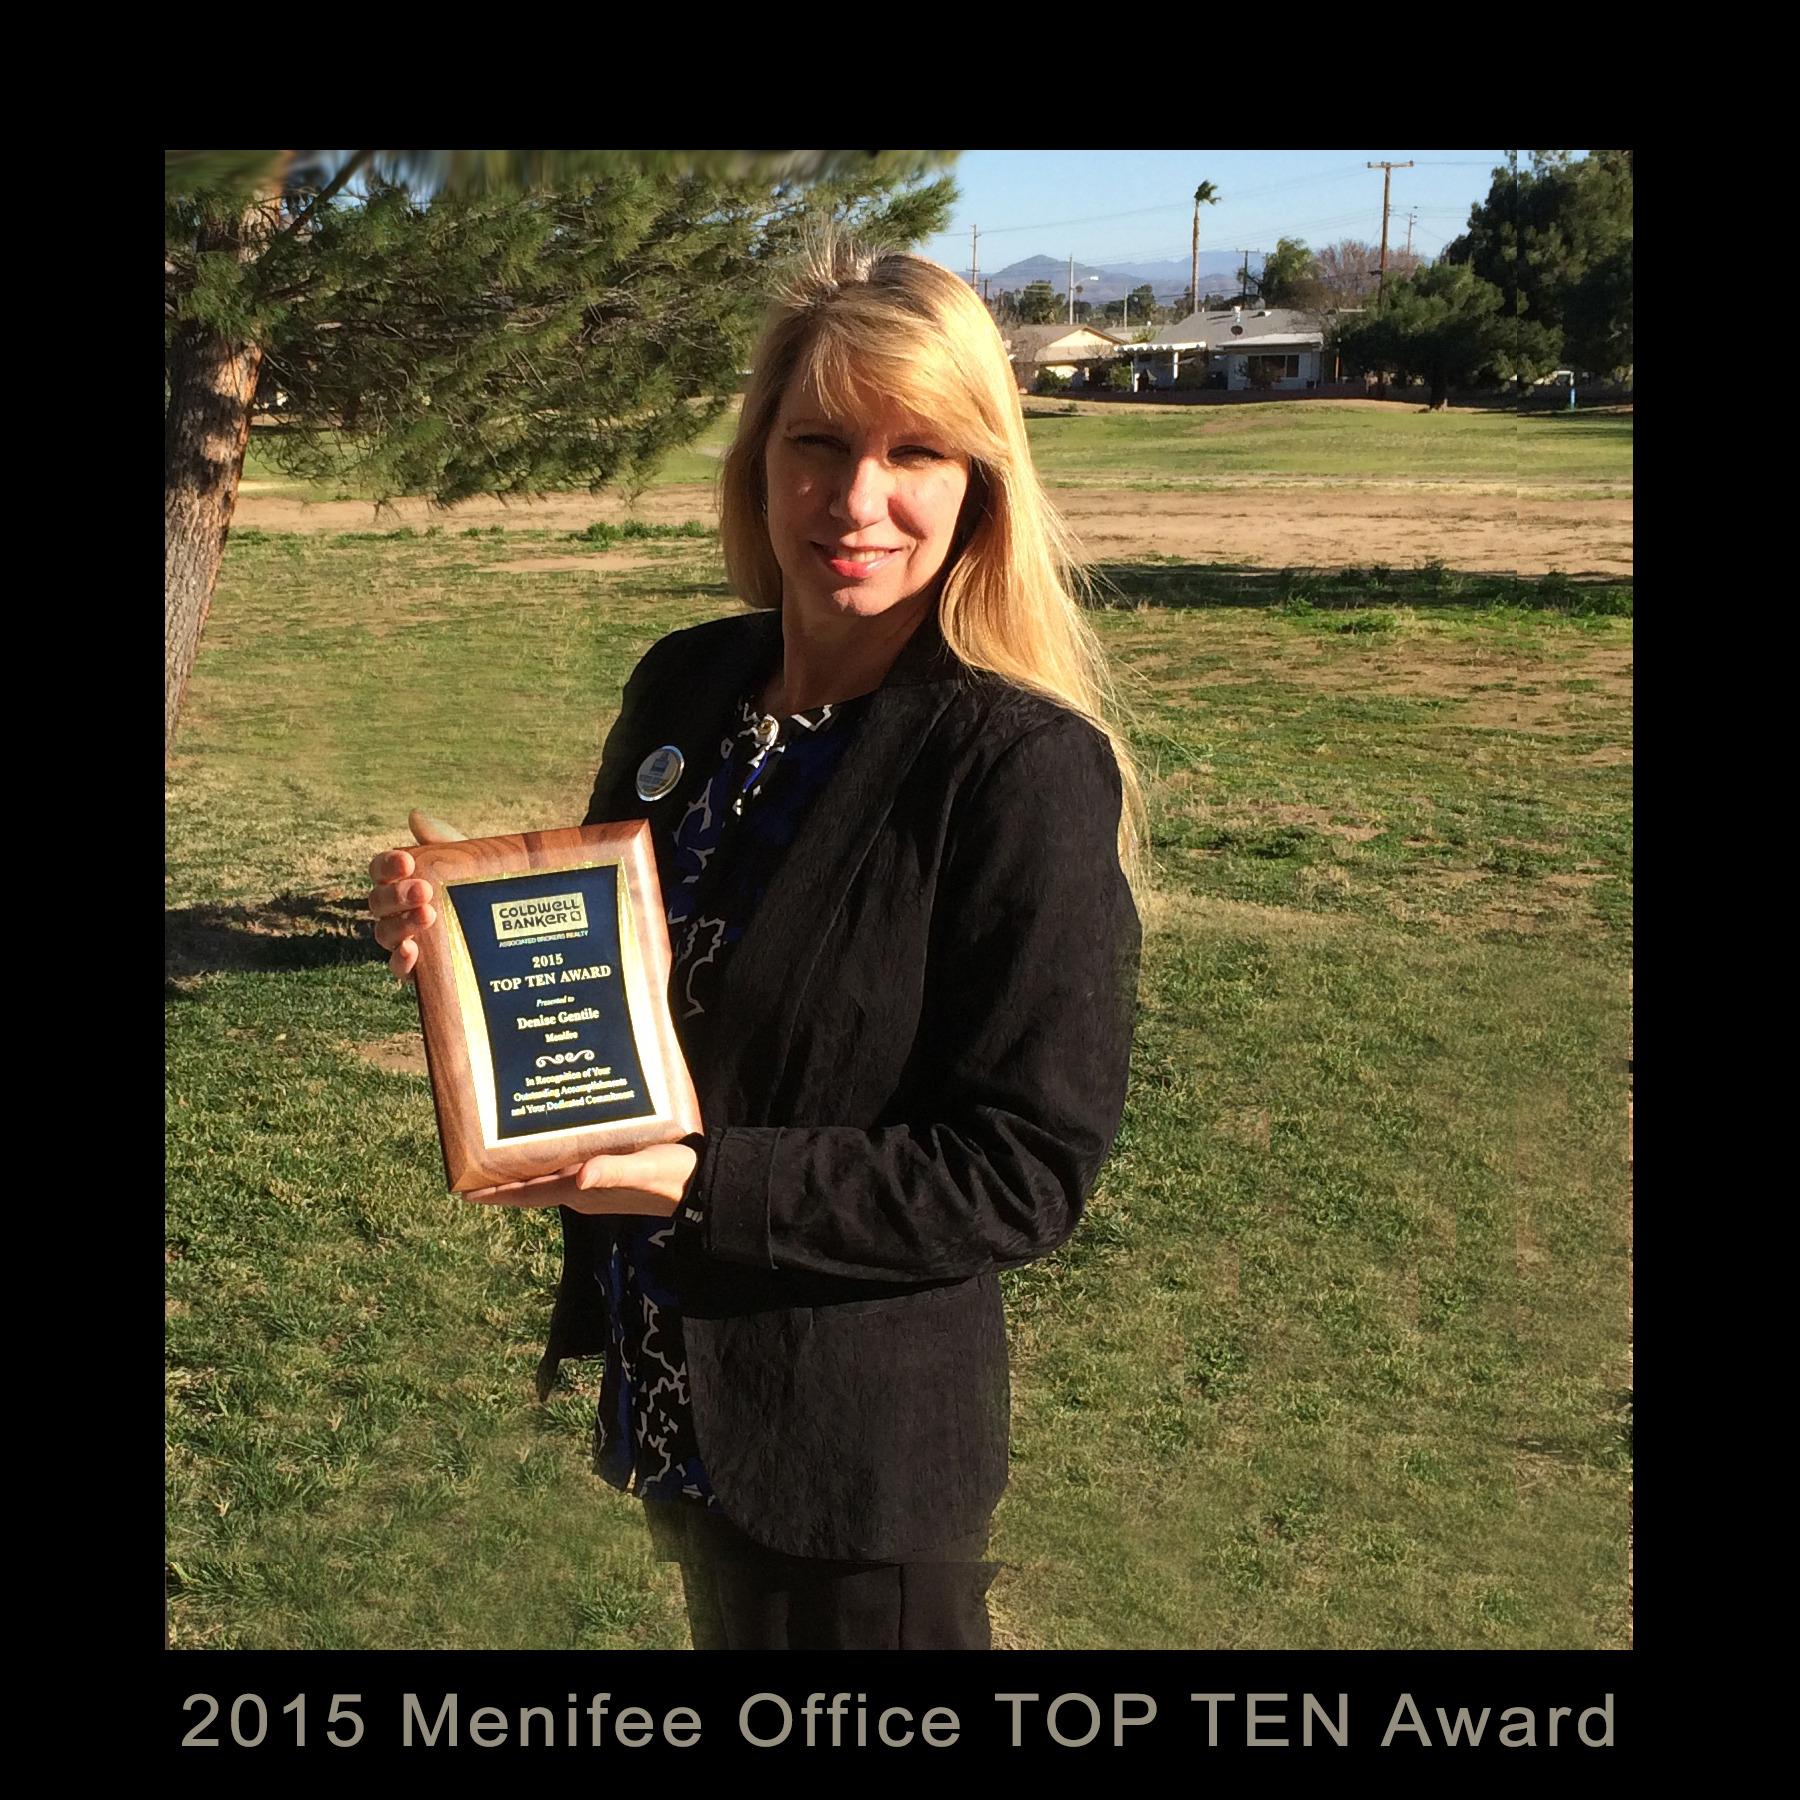 Coldwell Banker Associated Brokers Realty - Office Top 10 award